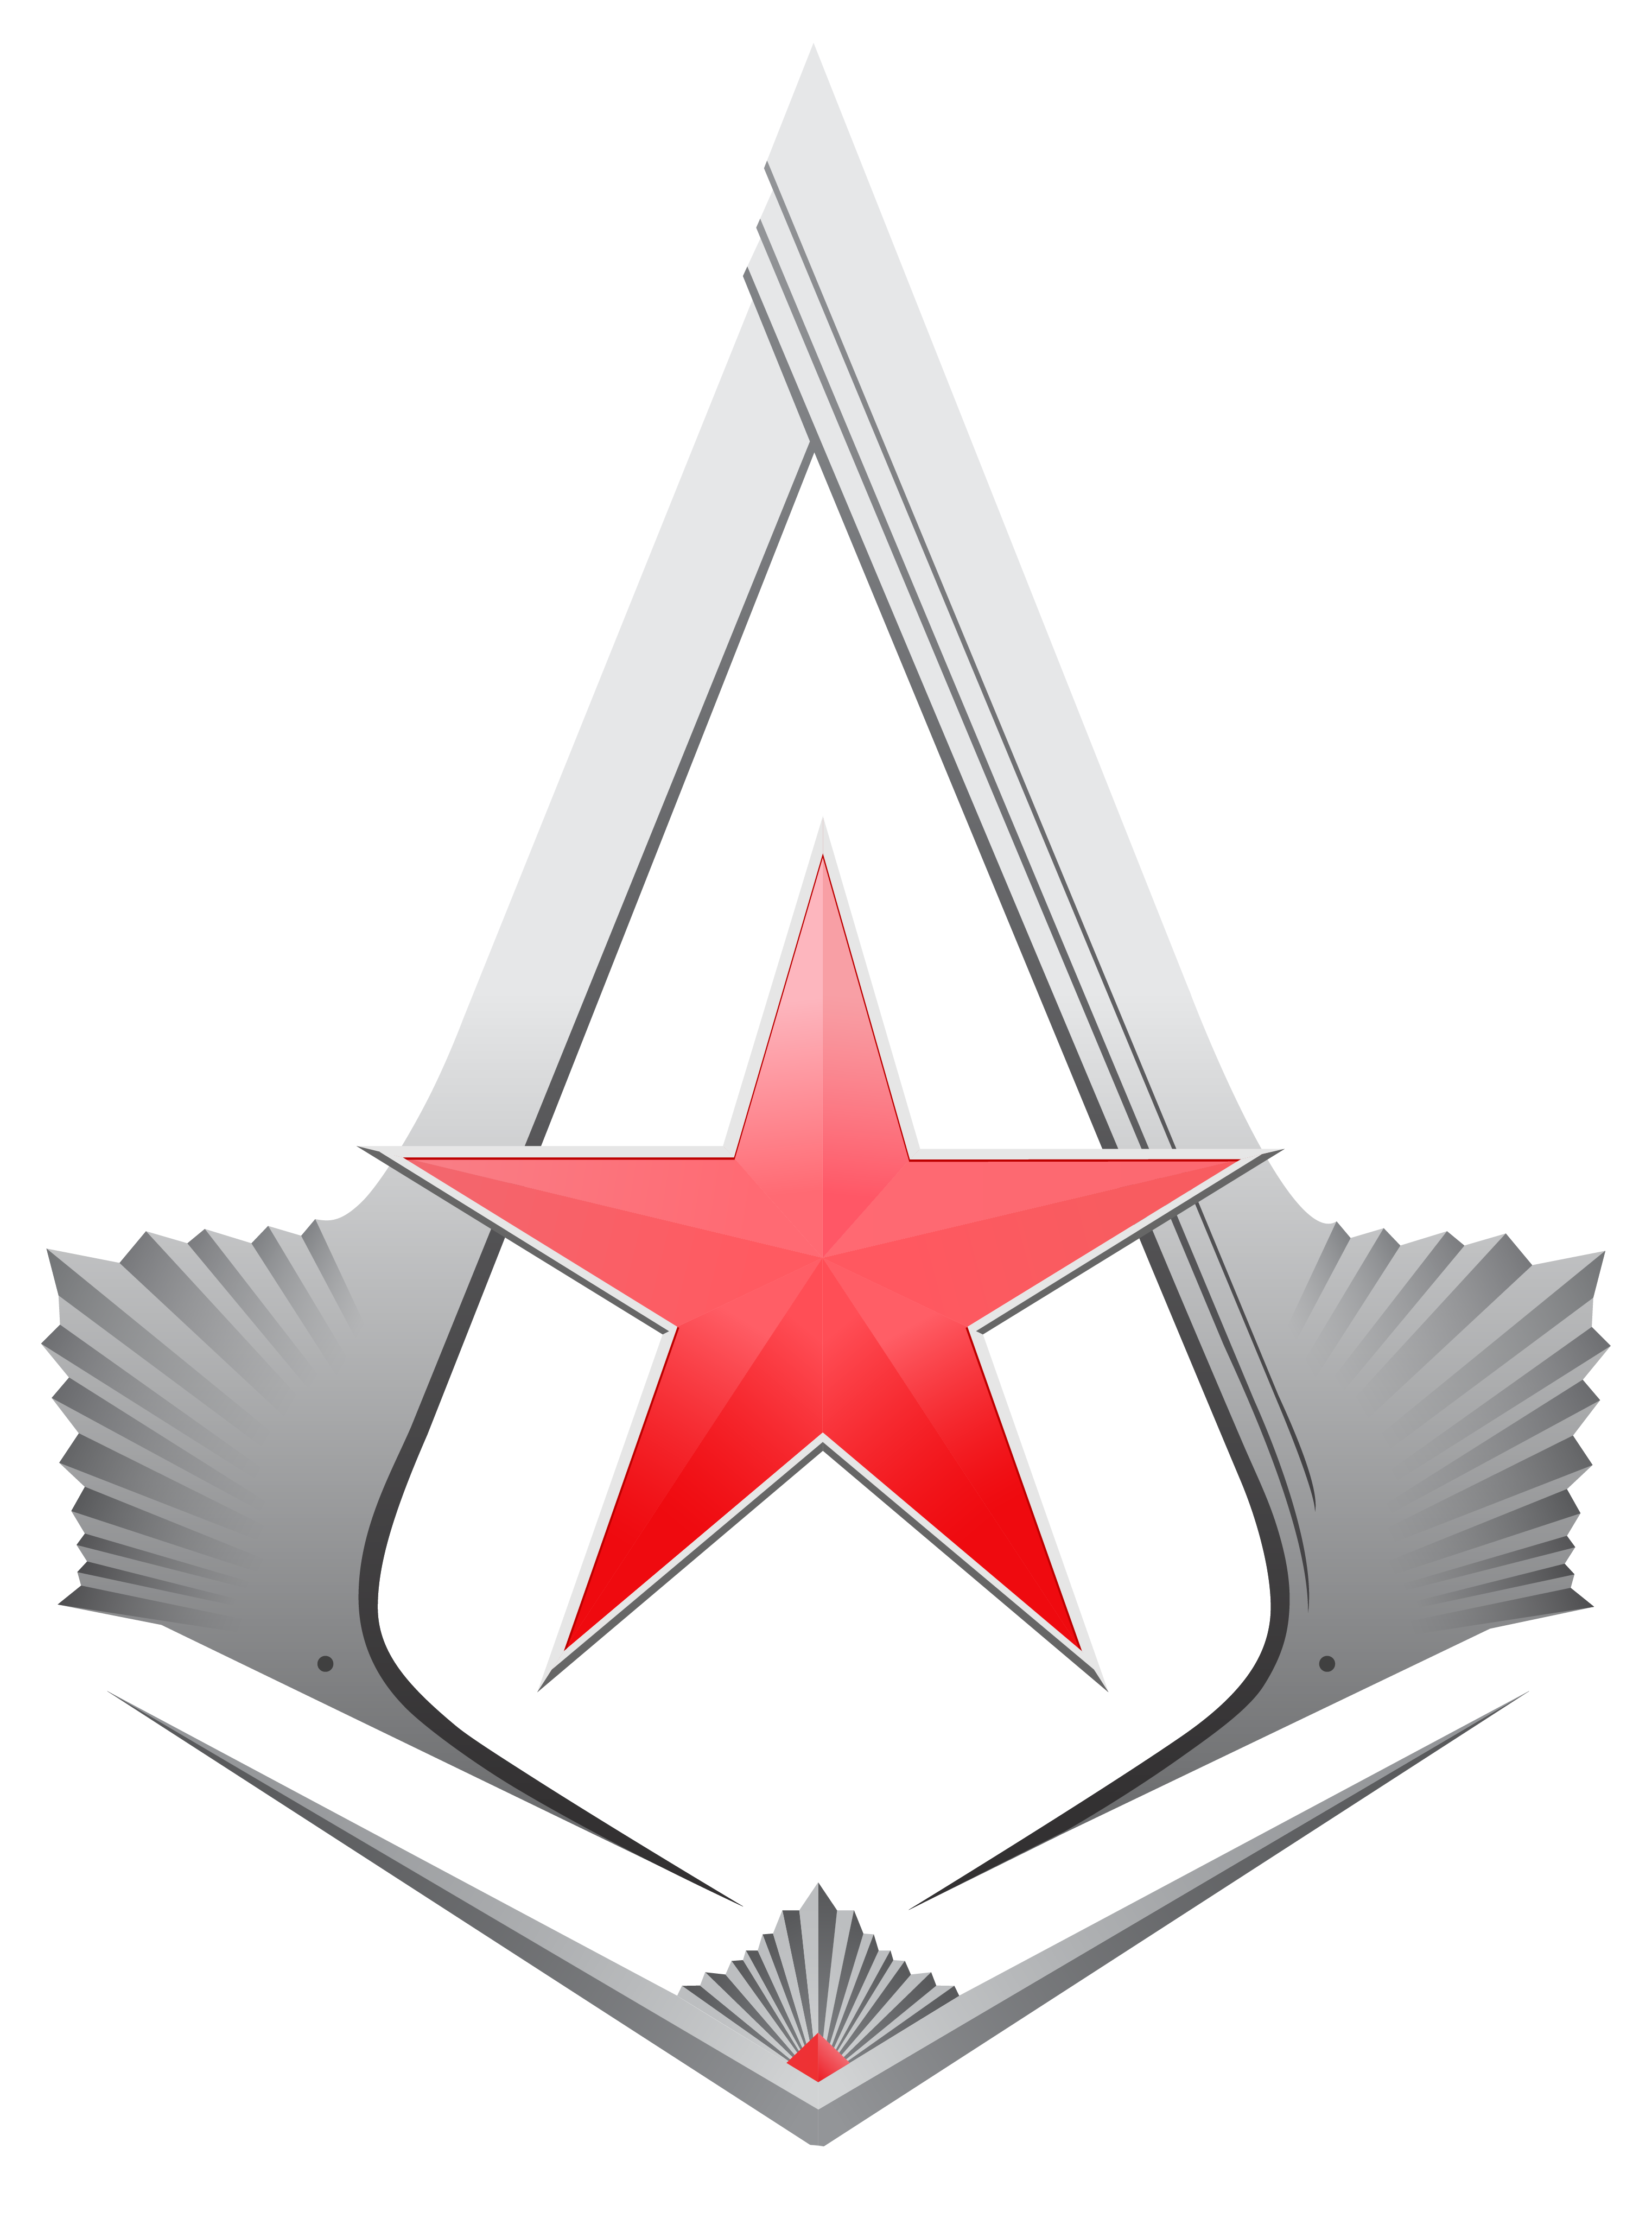 File:Assassins Creed II game logo.png - Wikimedia Commons